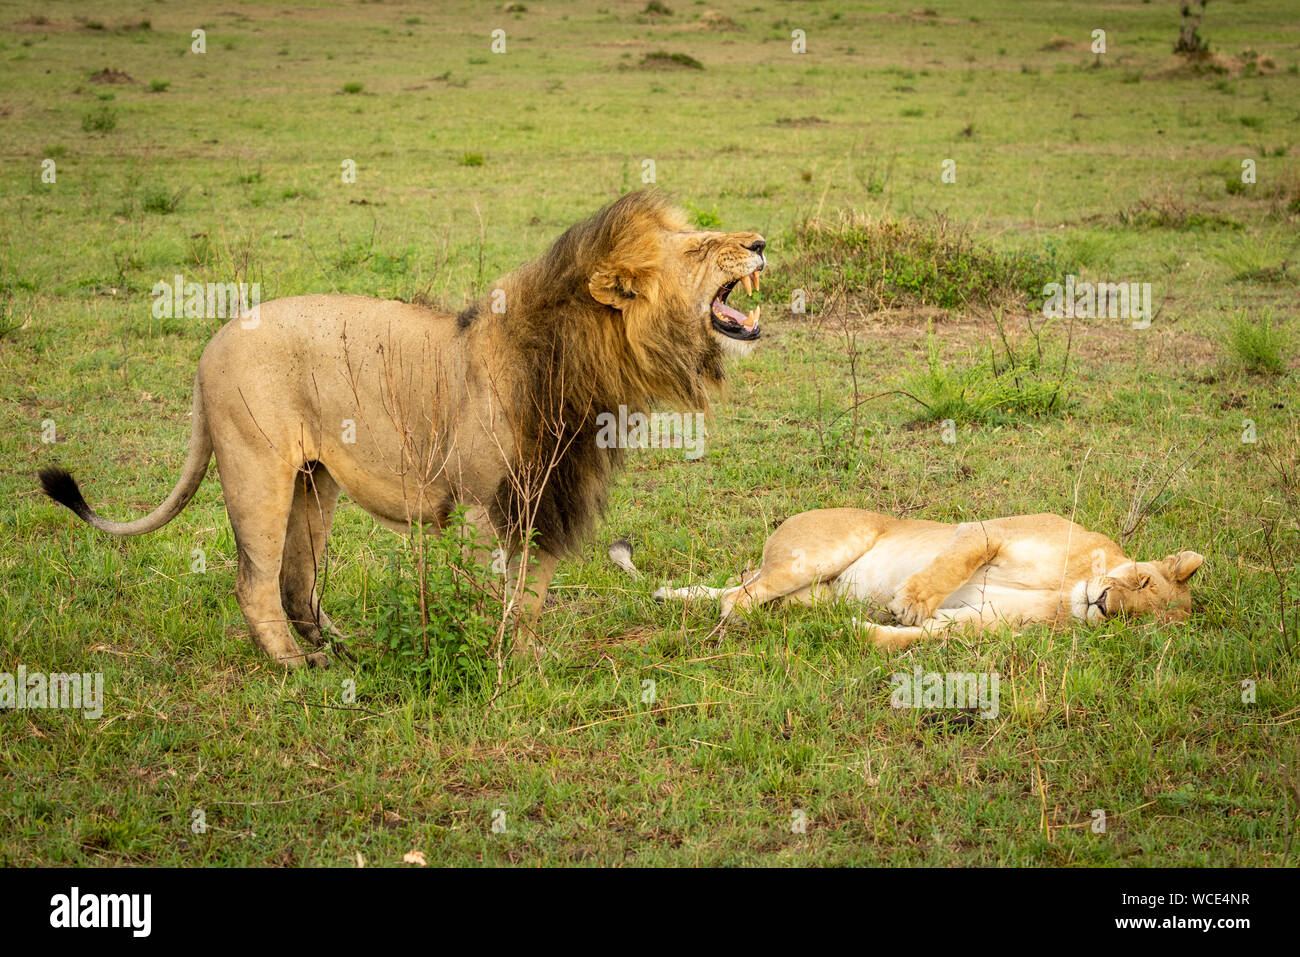 Male lion stands over lioness baring teeth Stock Photo - Alamy